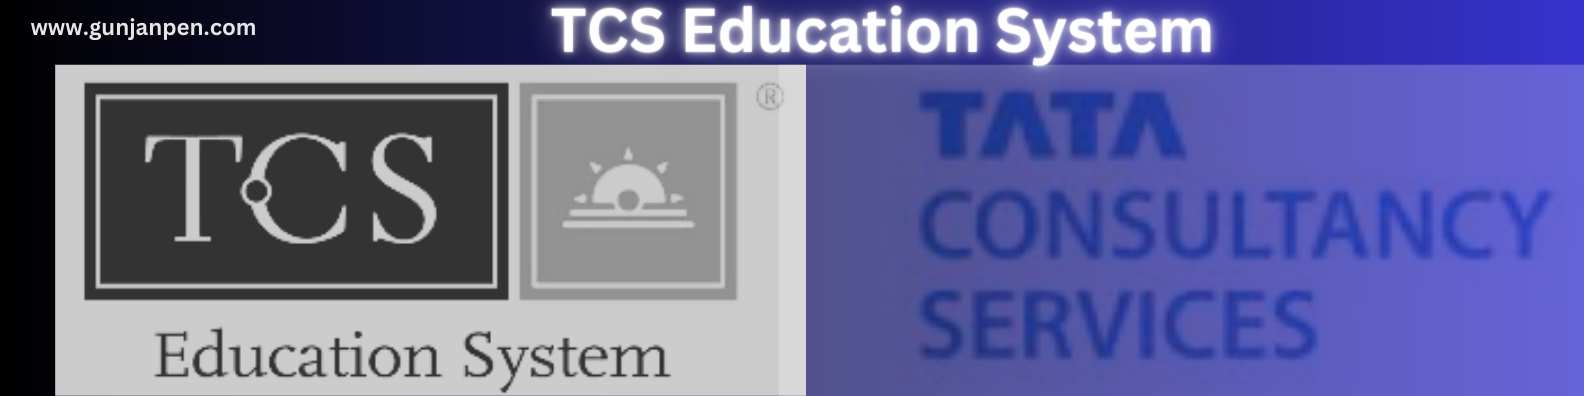 TCS Education System: Shaping Futures Through Innovative Education